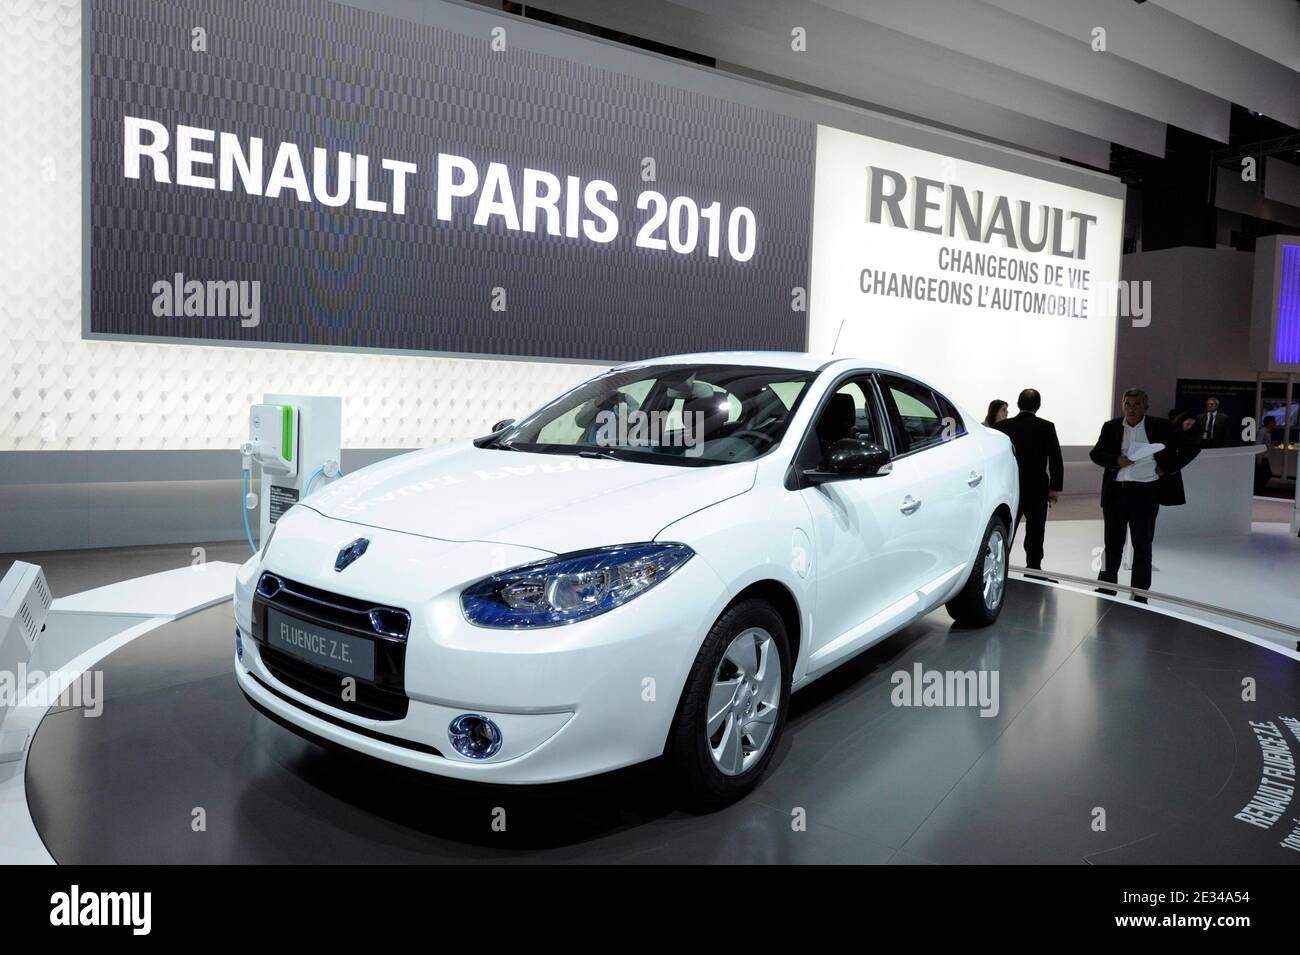 New Renault Fluence ZE electrical car at the Paris Motor Show 'Mondial de l' Automobile' in Paris, France on September 30, 2010. The Paris Motor Show takes place every two years and is one of the largest expositions of motor vehicles in the world. This year, the emphasis of the show lies on electric cars and more than 300 exhibitors from 20 countries are expected to take part. Photo by Henri Szwarc/ABACAPRESS.COM Stock Photo